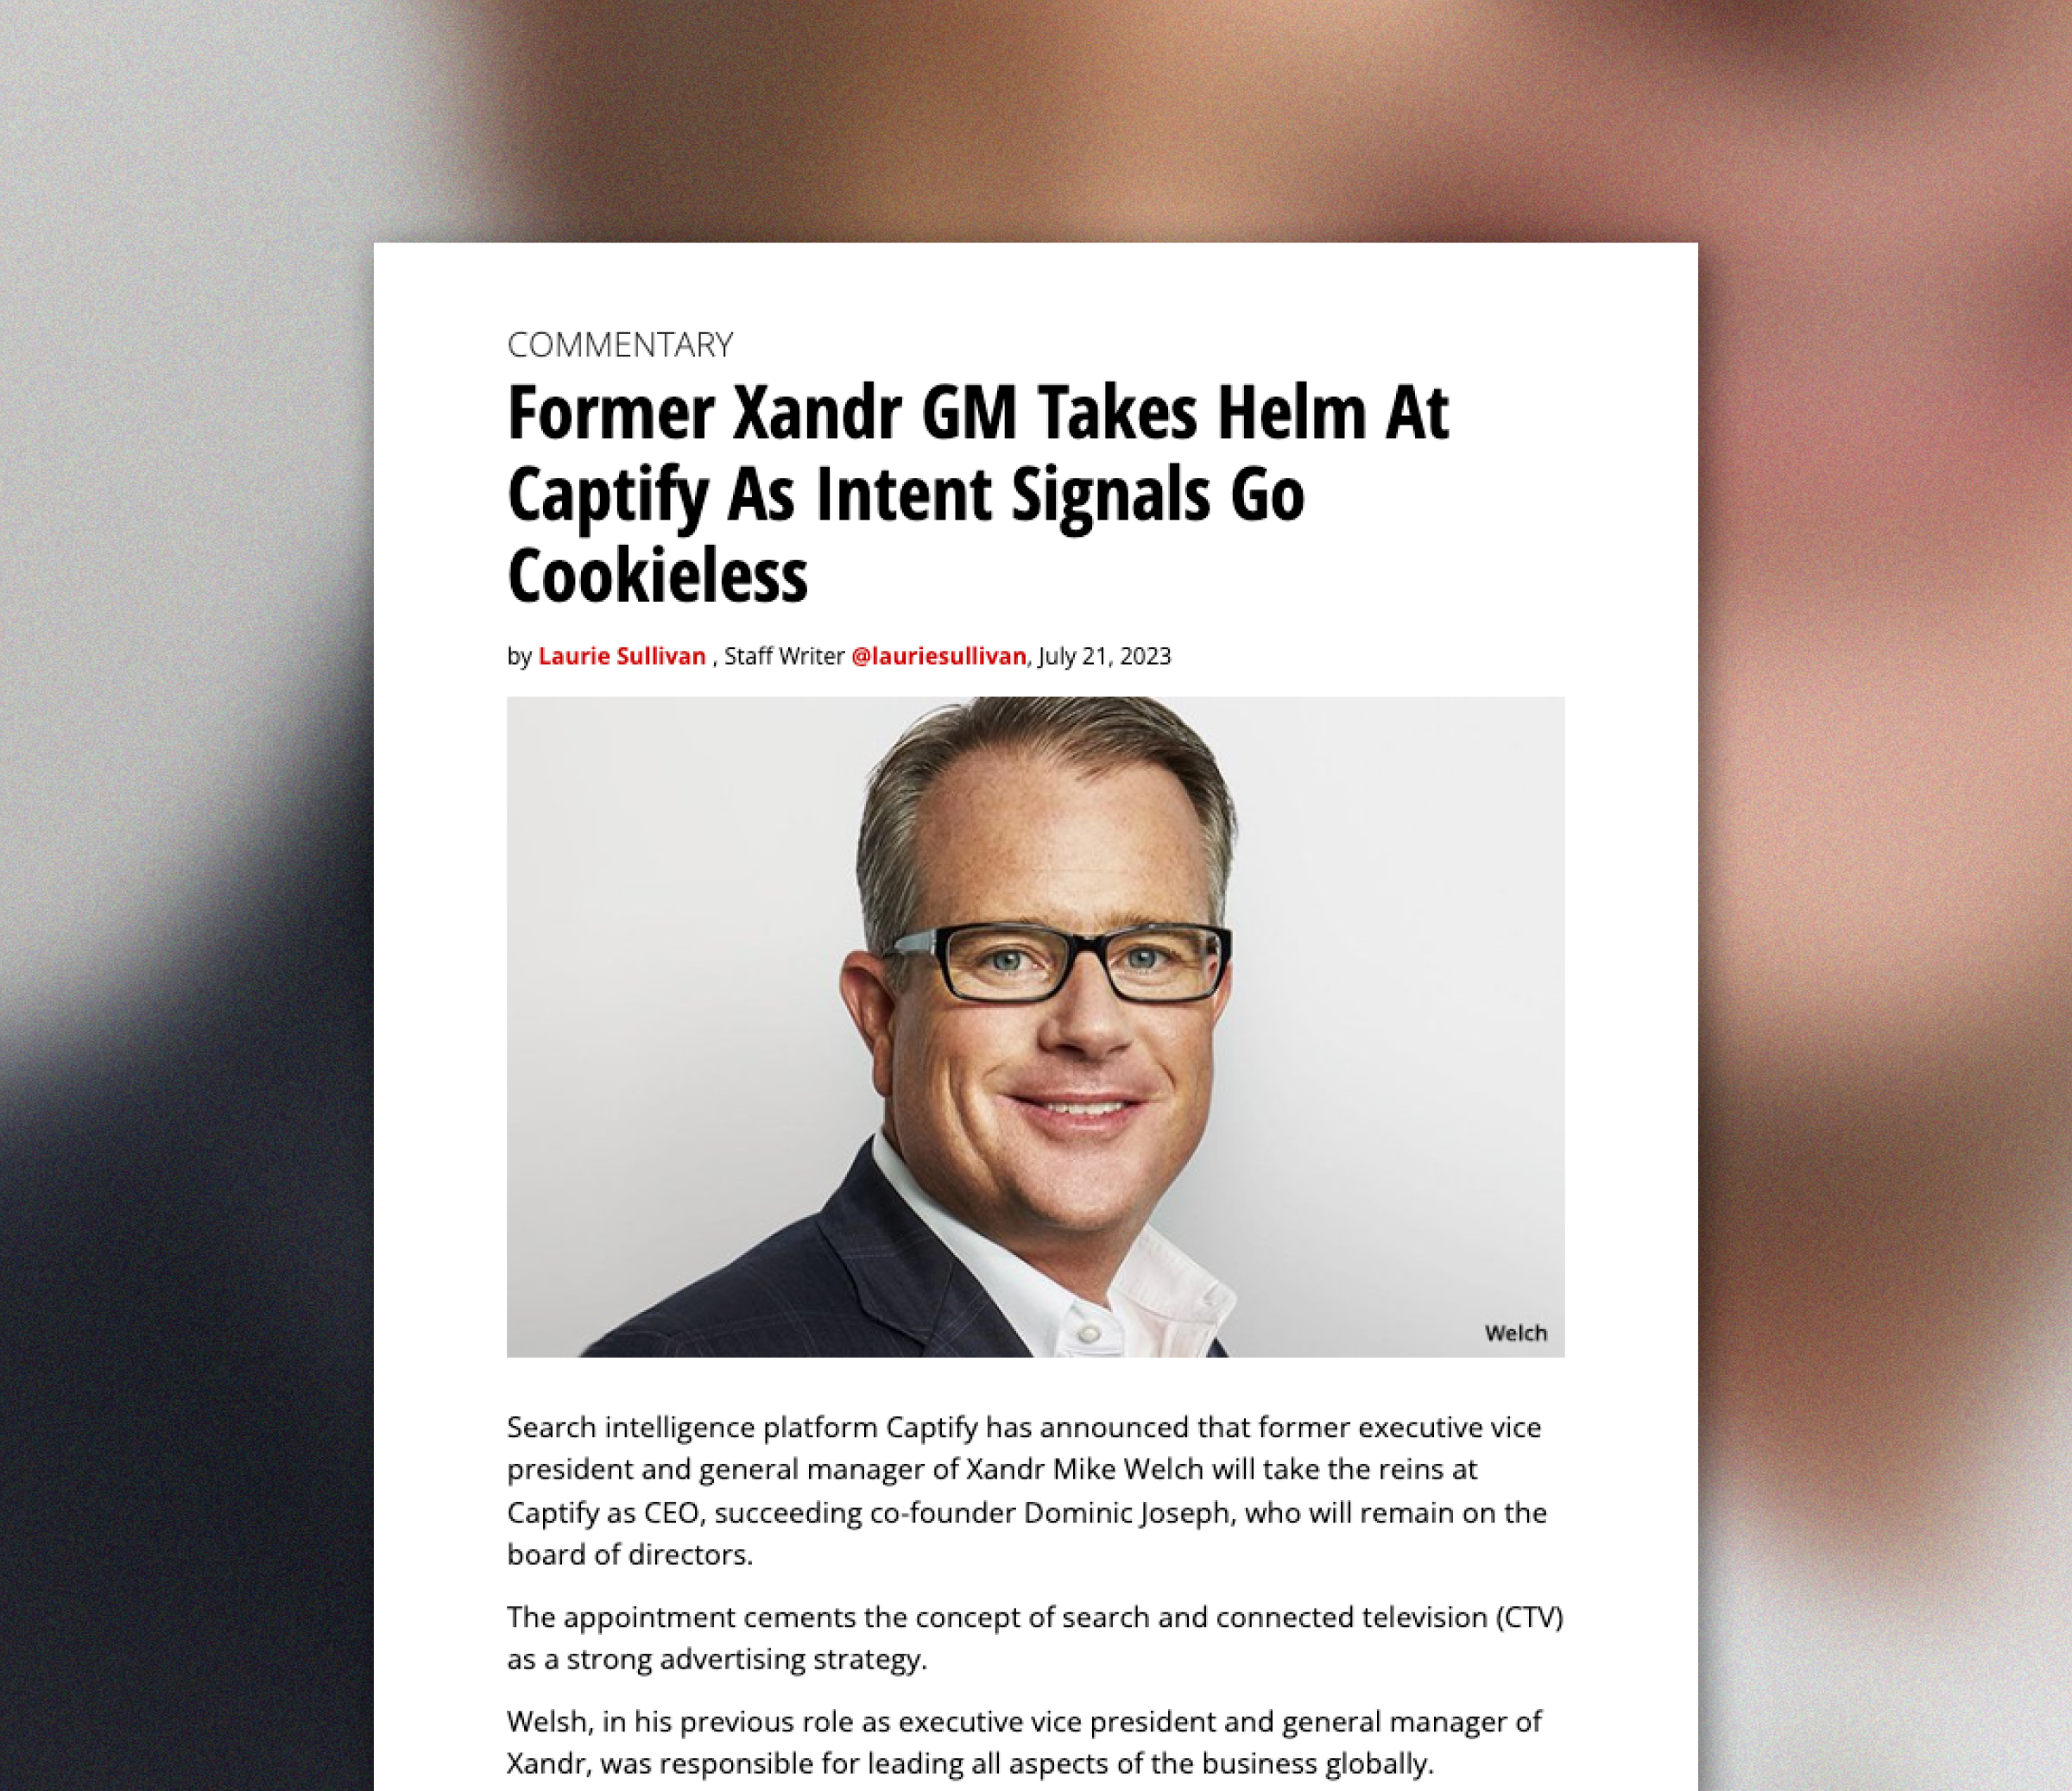 MediaPost: Former Xandr GM Takes Helm At Captify As Intent Signals Go Cookieless